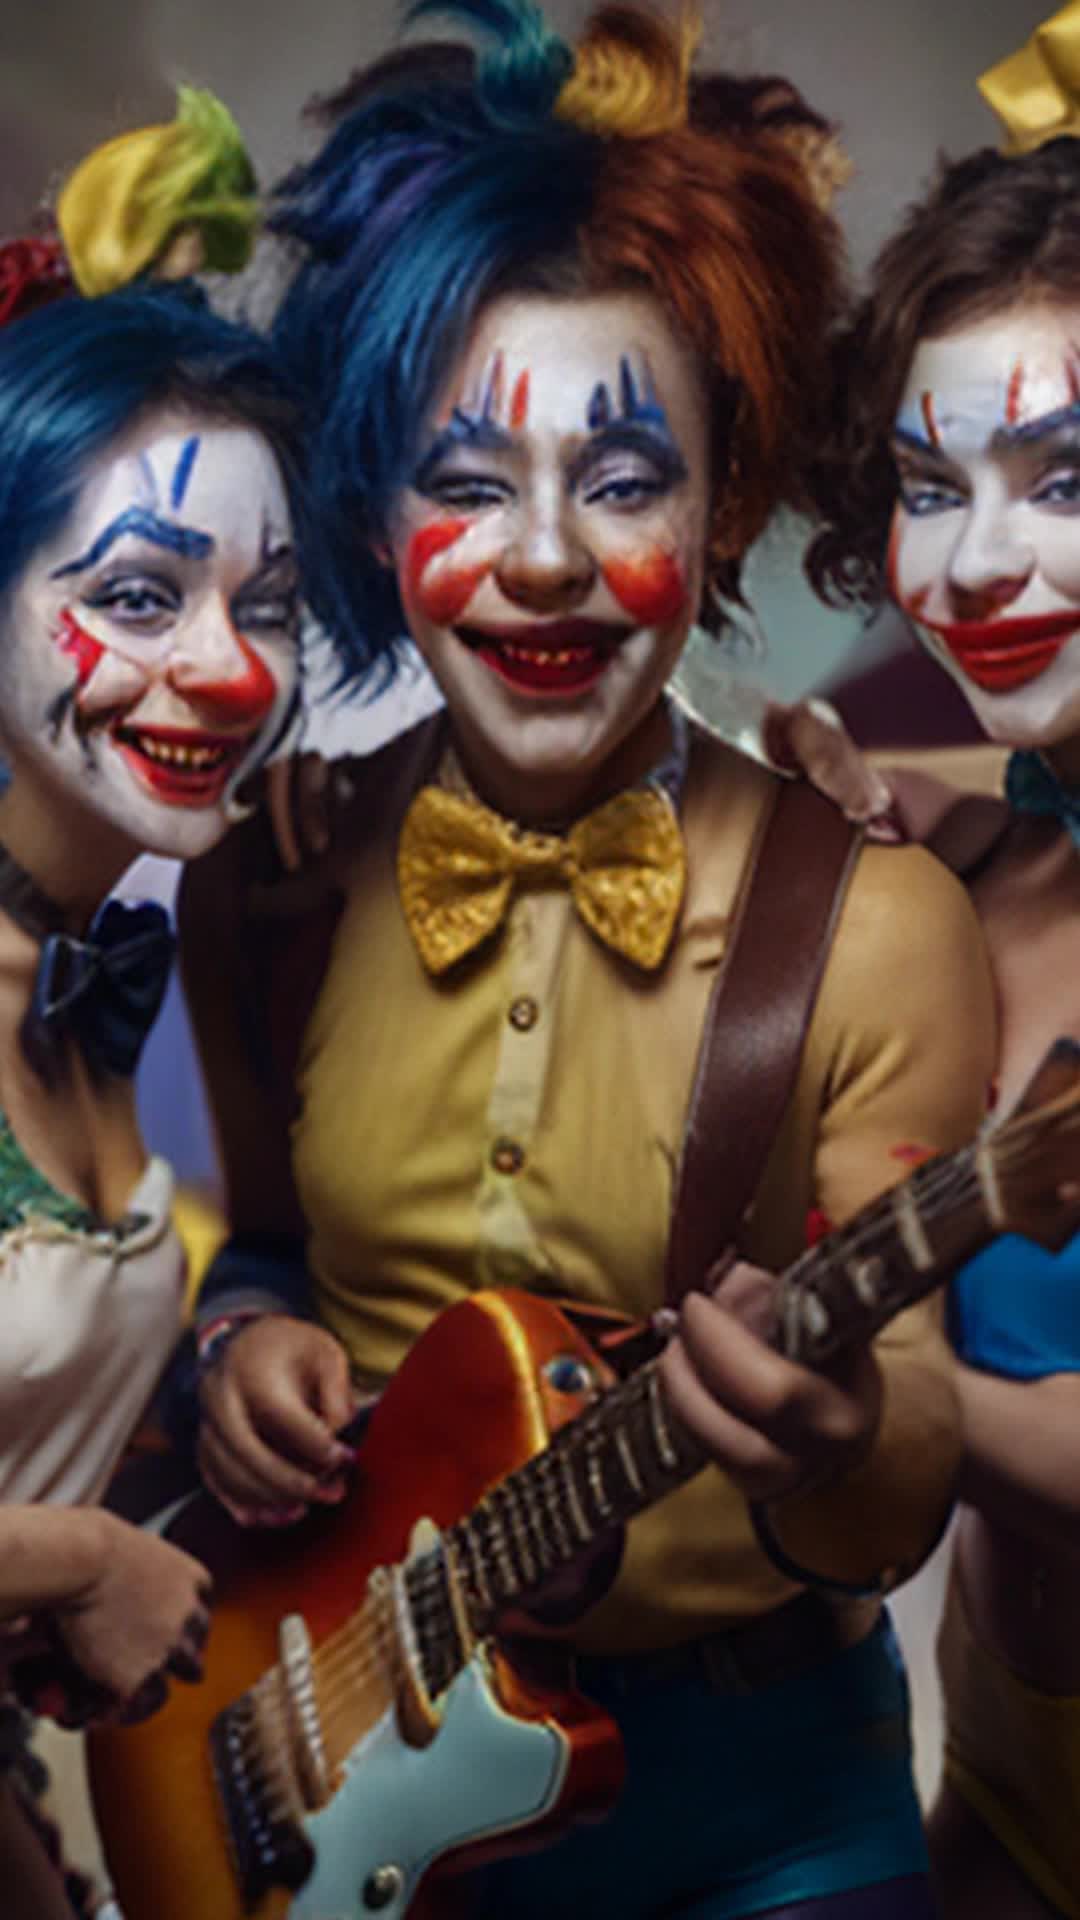 GIRL CLOWNS IN A MASH PIC ROCKING OUT